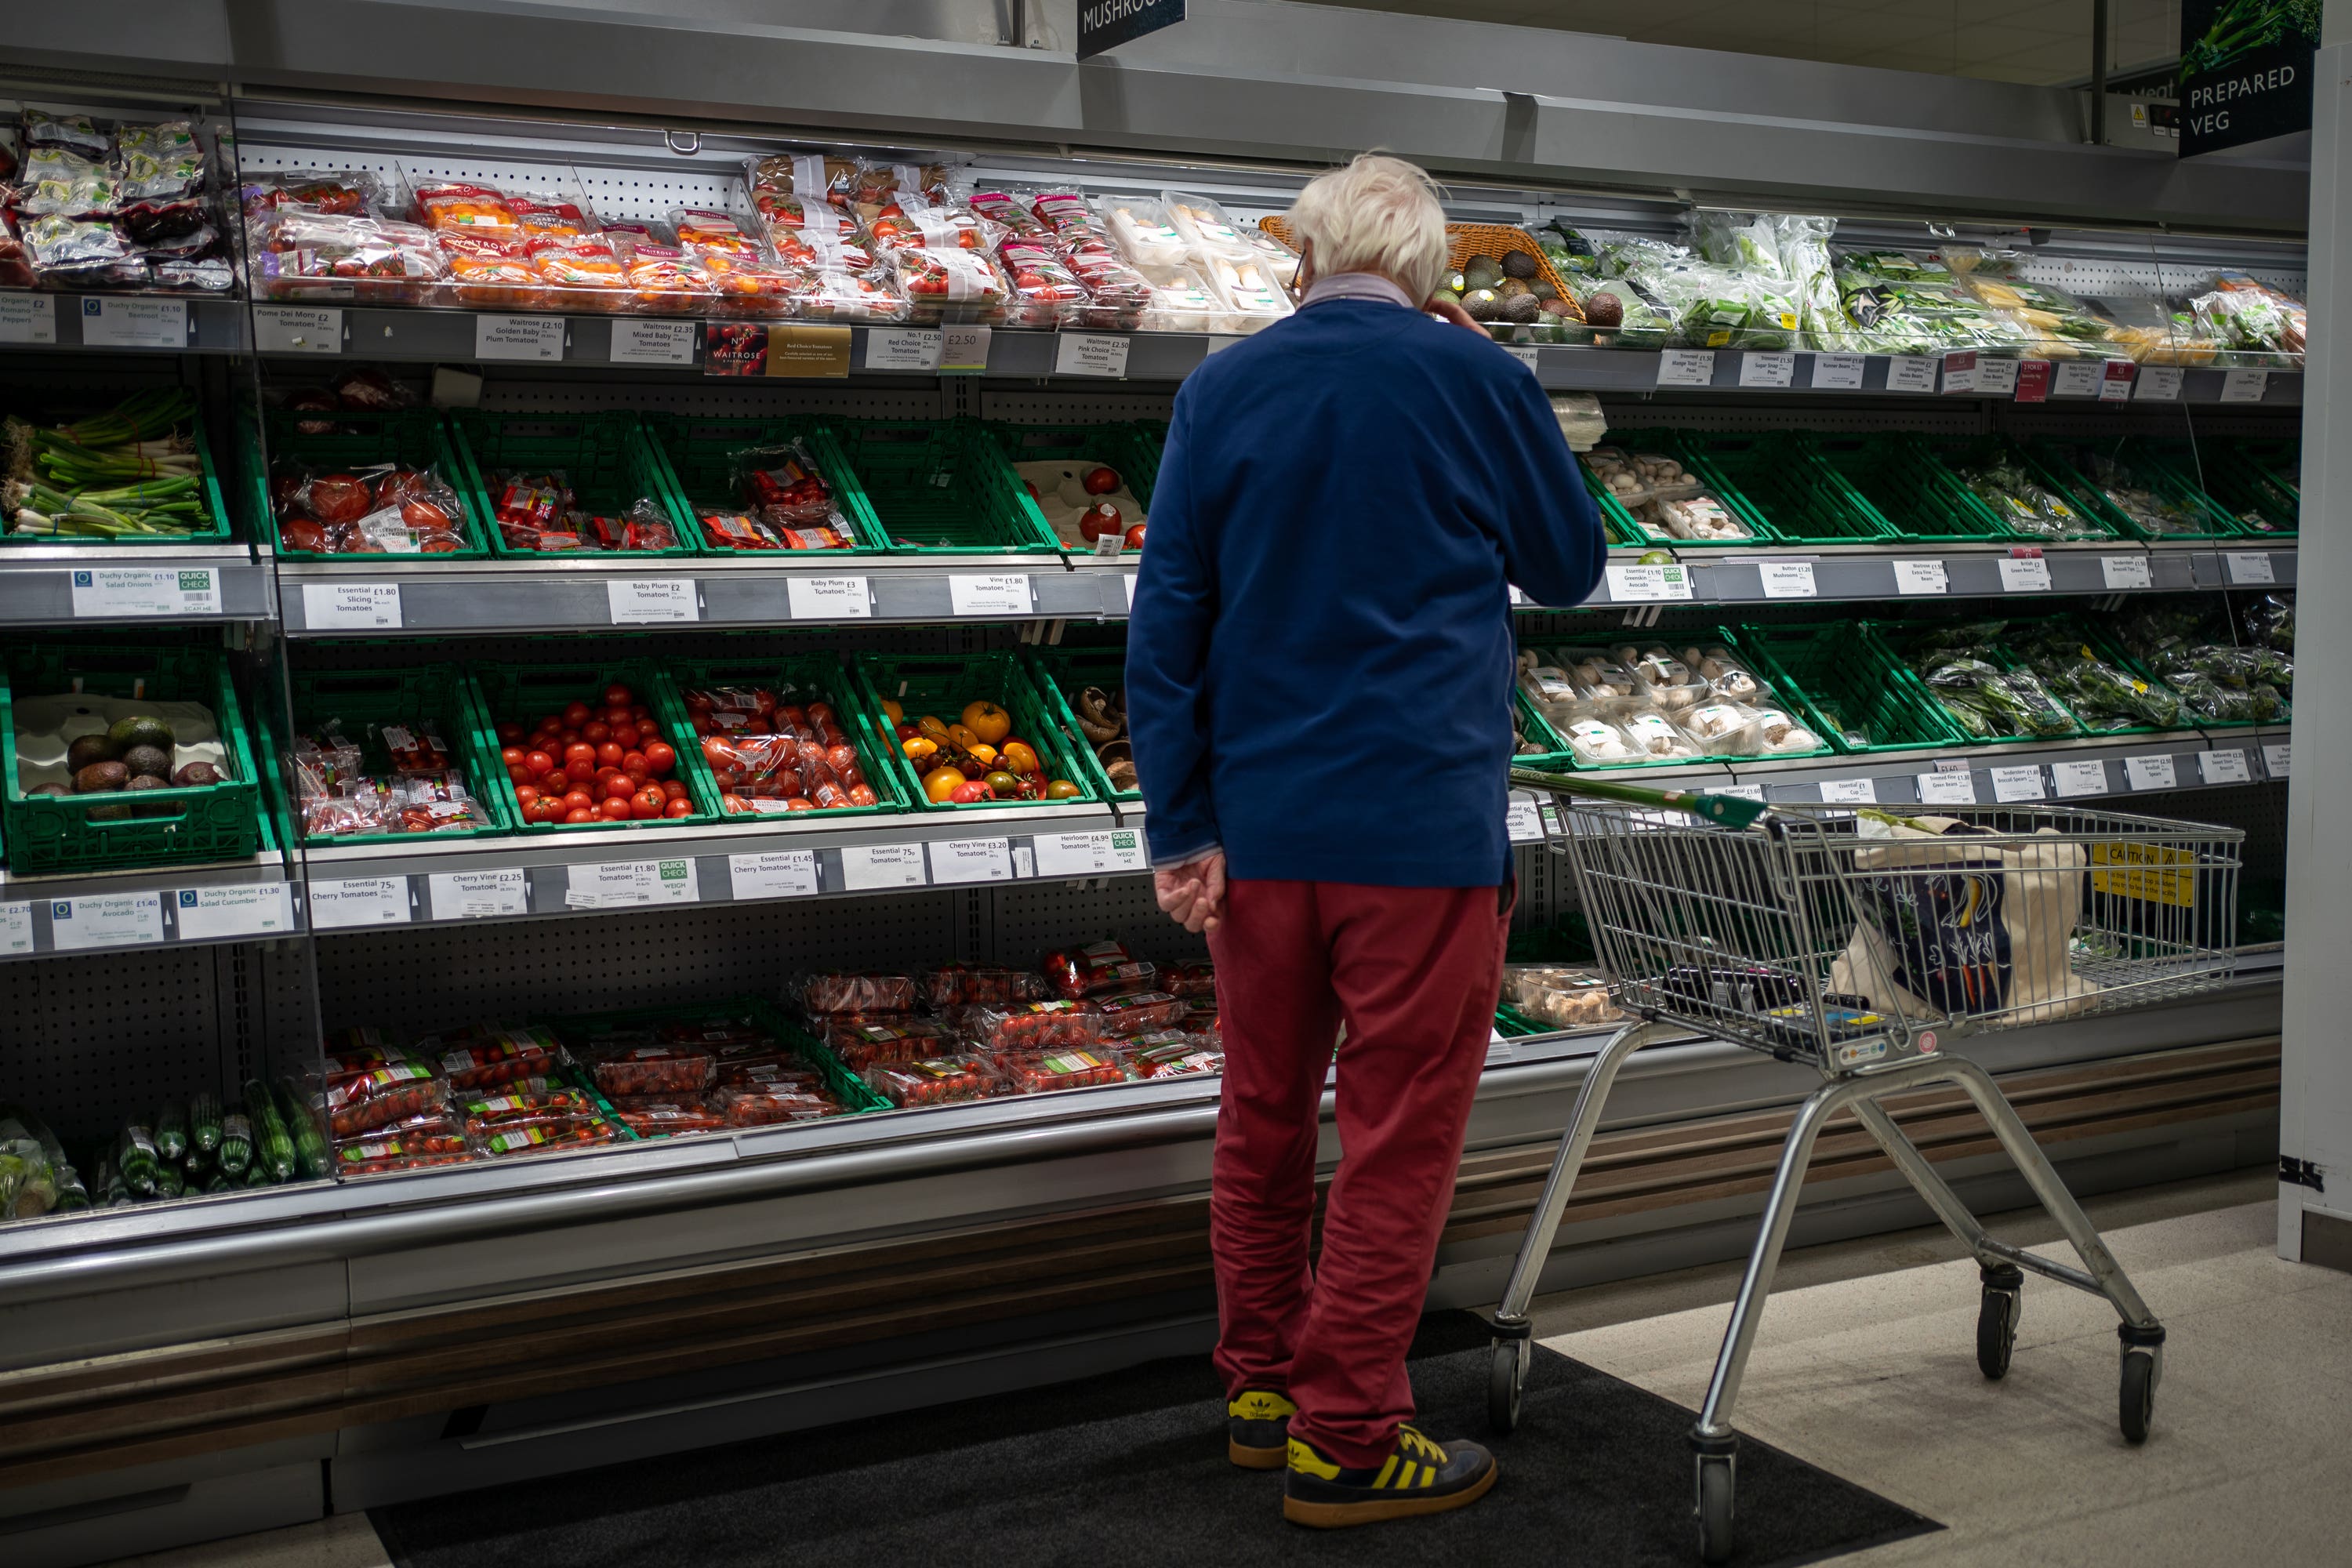 UK inflation shot up unexpectedly last month as vegetable shortages pushed food prices to their highest rate in more than 45 years, according to official figures